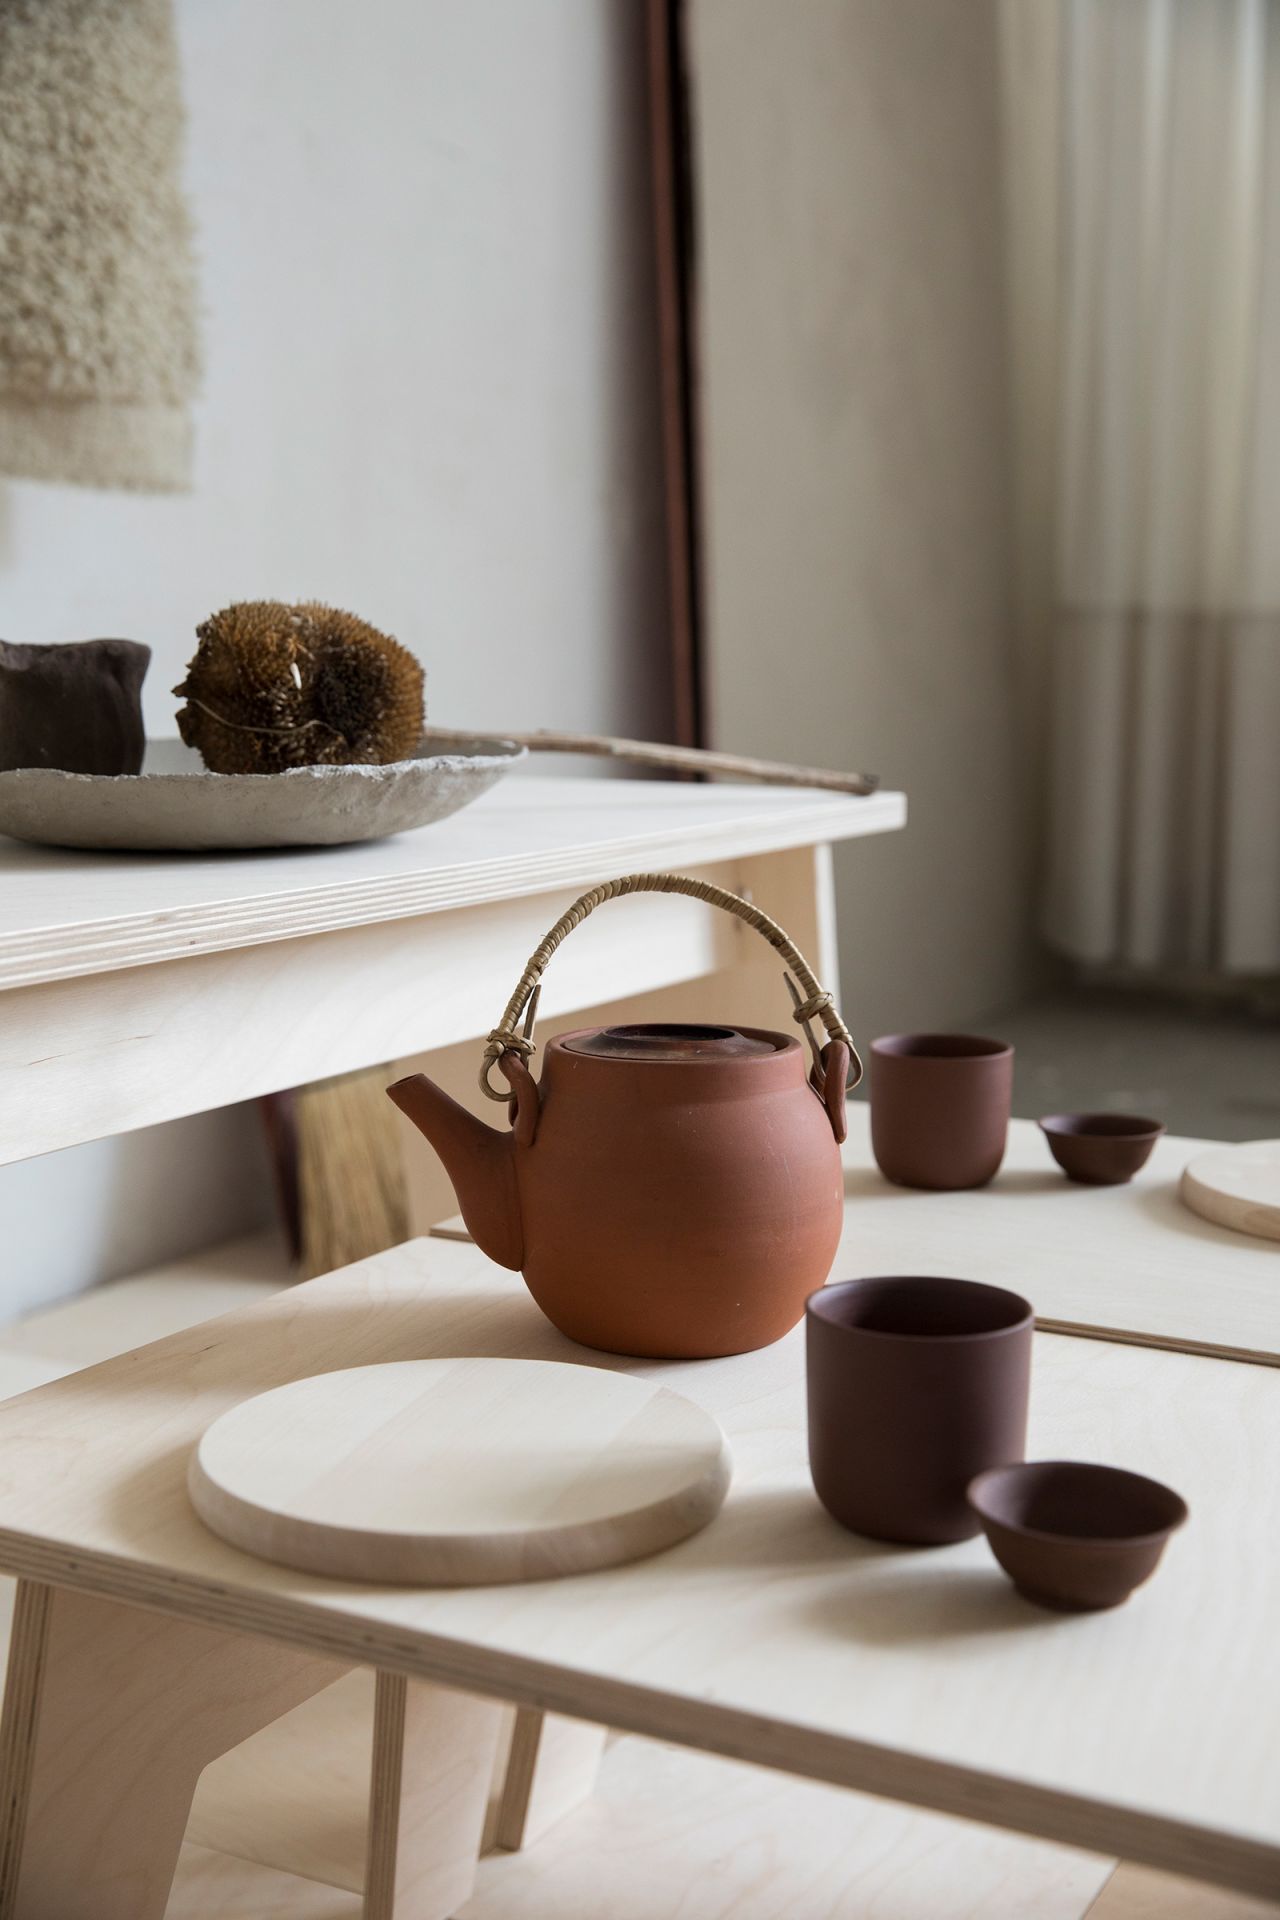 An earthern tea pot sits on a sleek wooden table designed by Woodchuck, styled by Tinta.